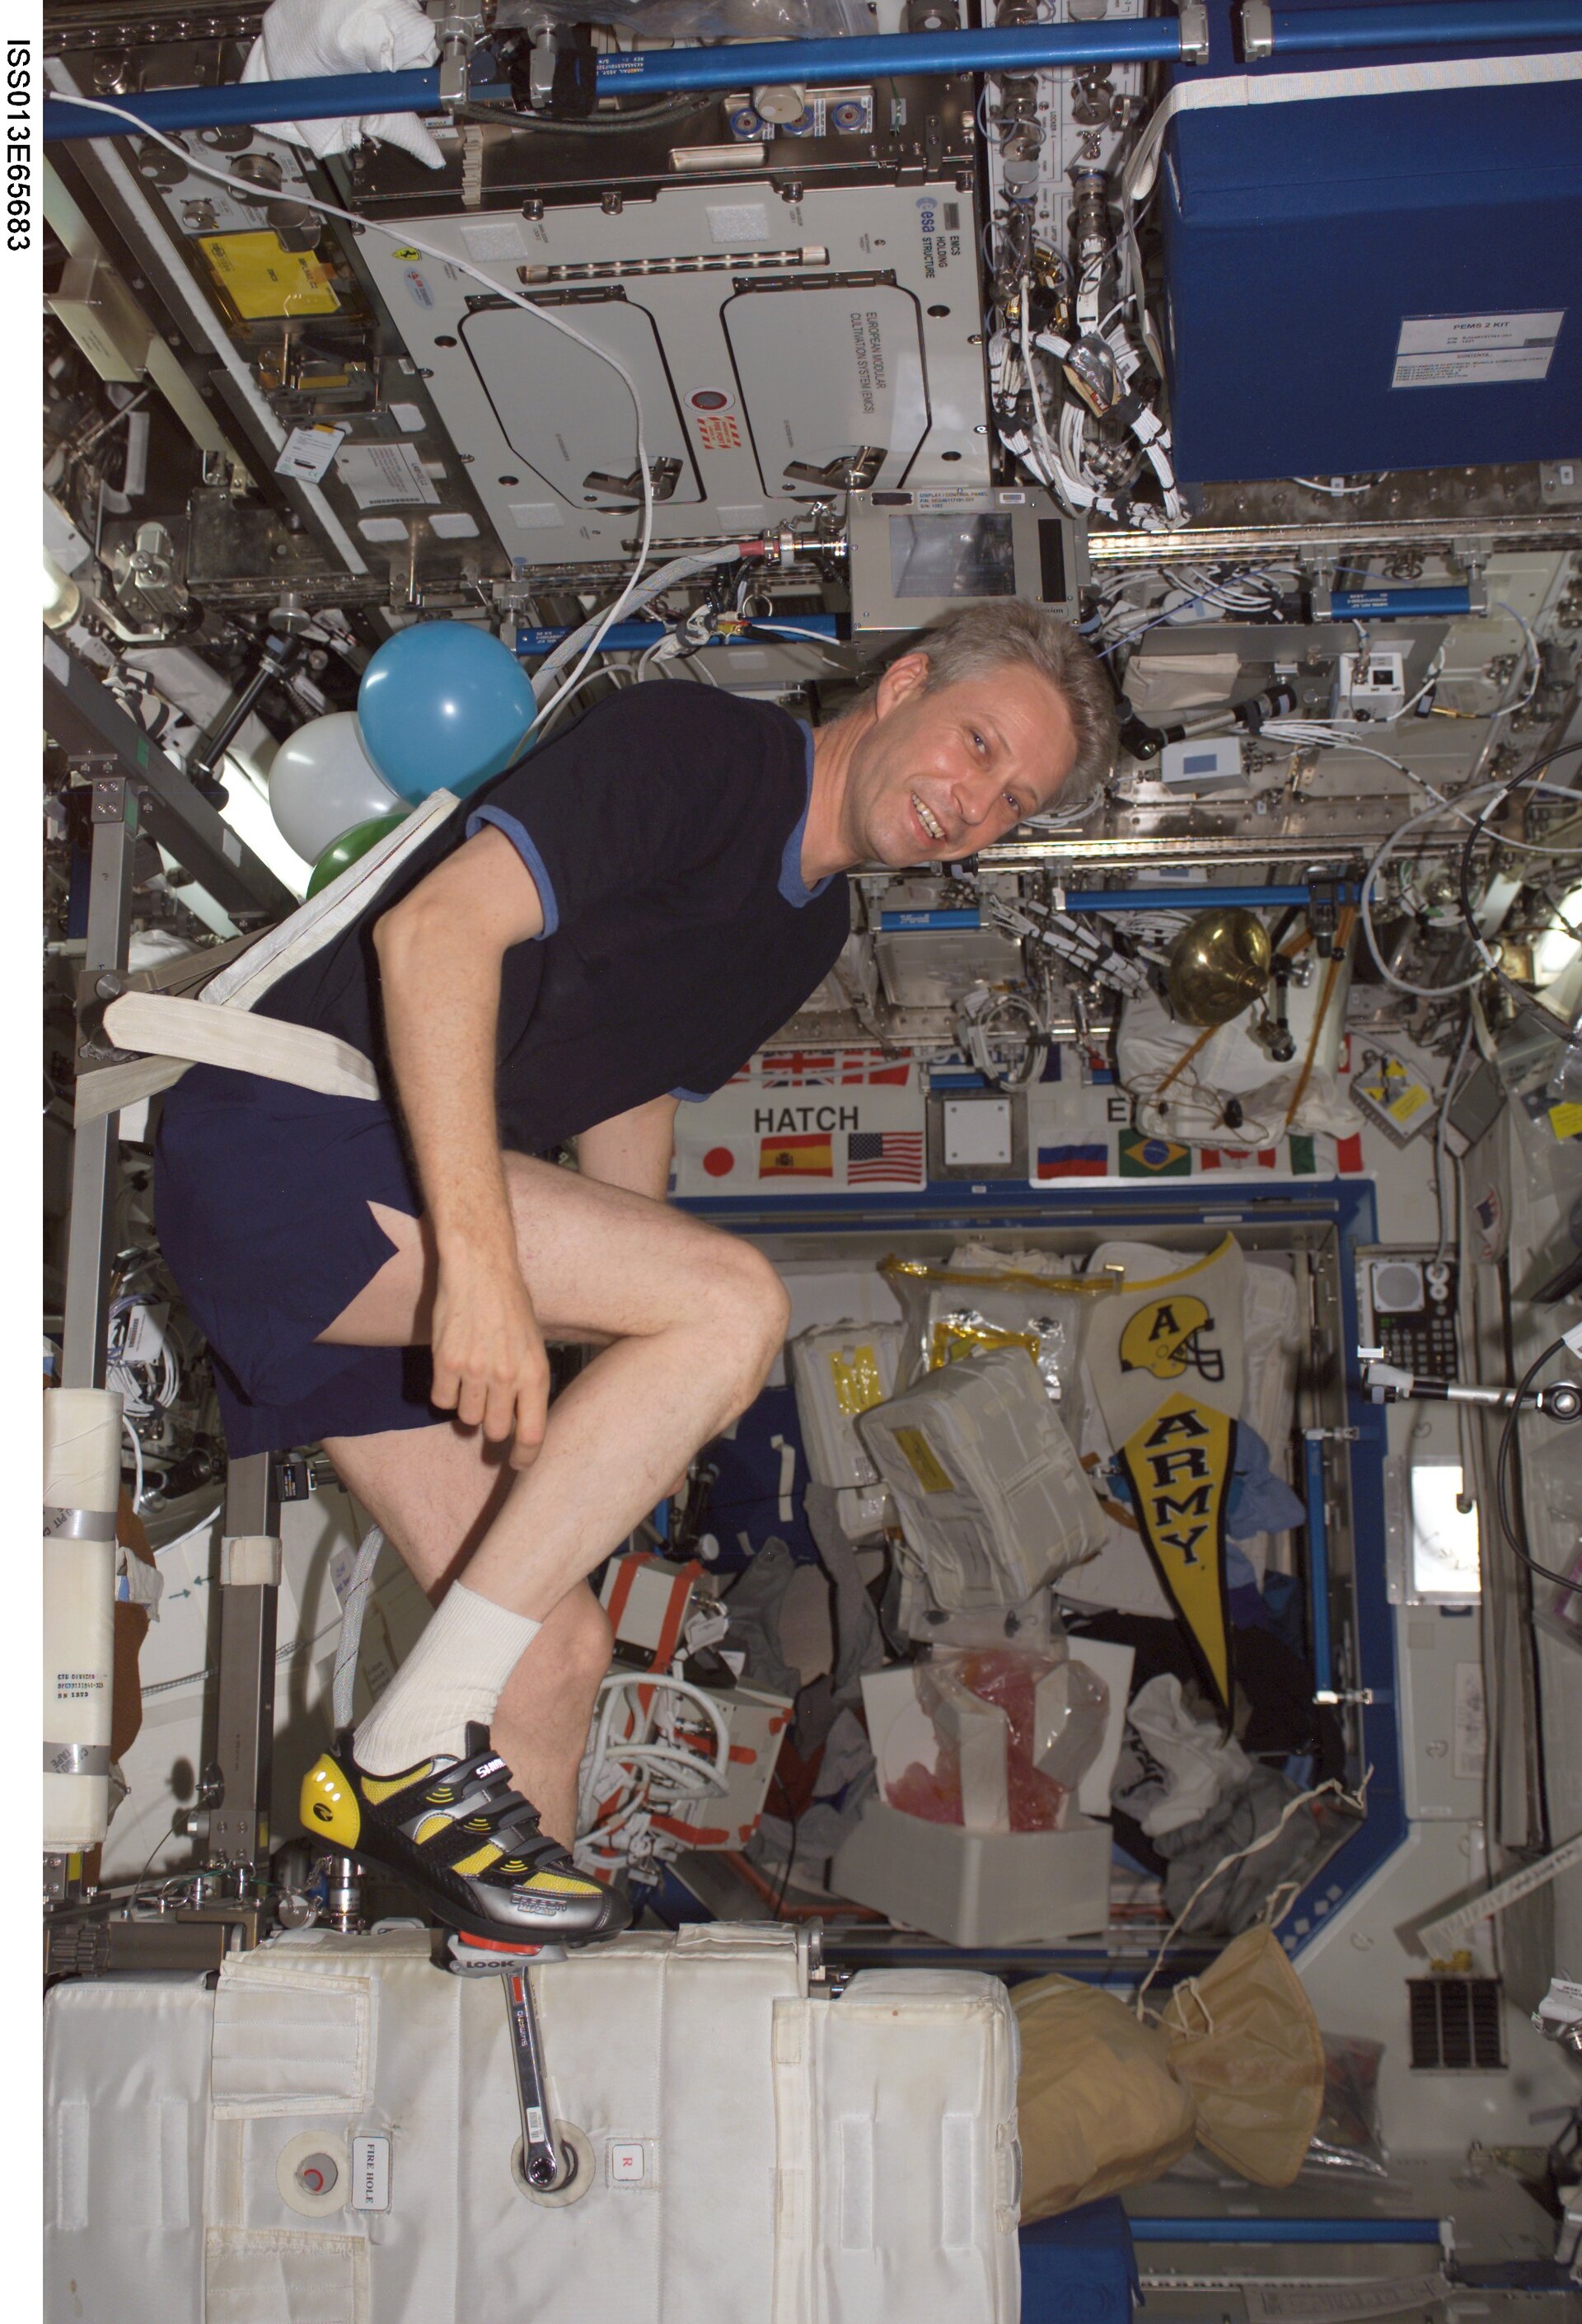 Exercising on board the ISS